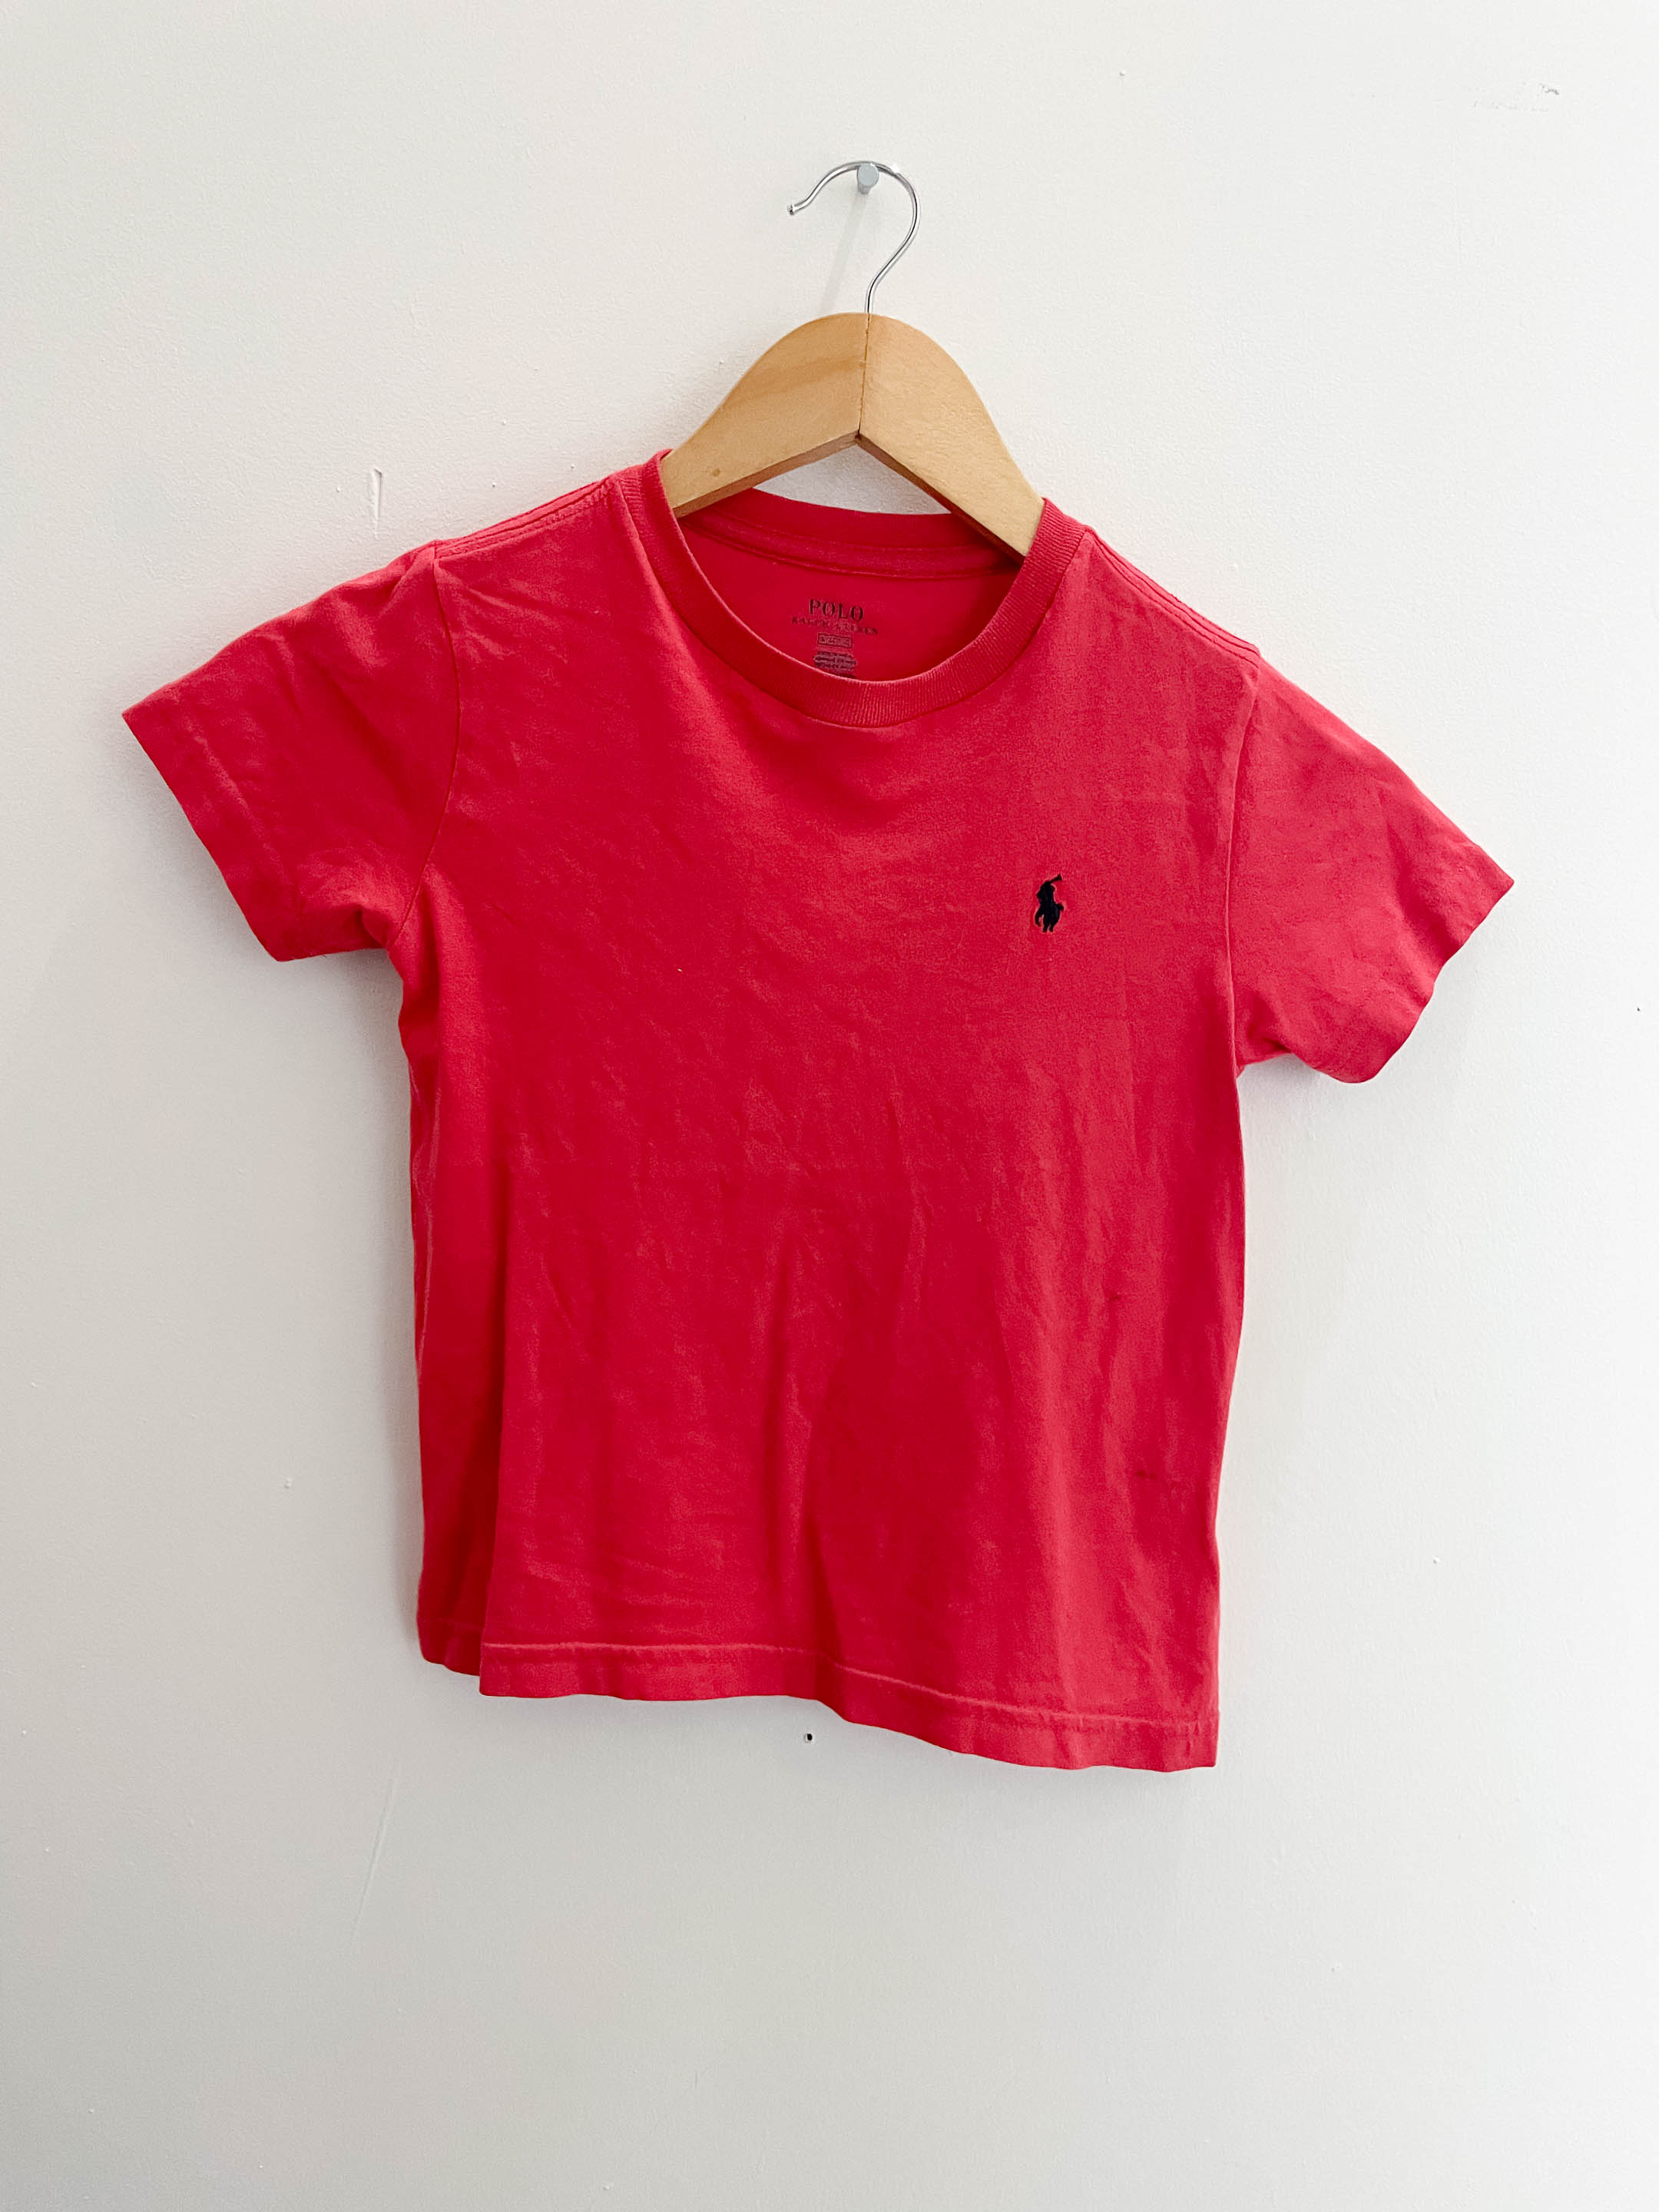 Vintage red polo ralph lauren tshirt size XS